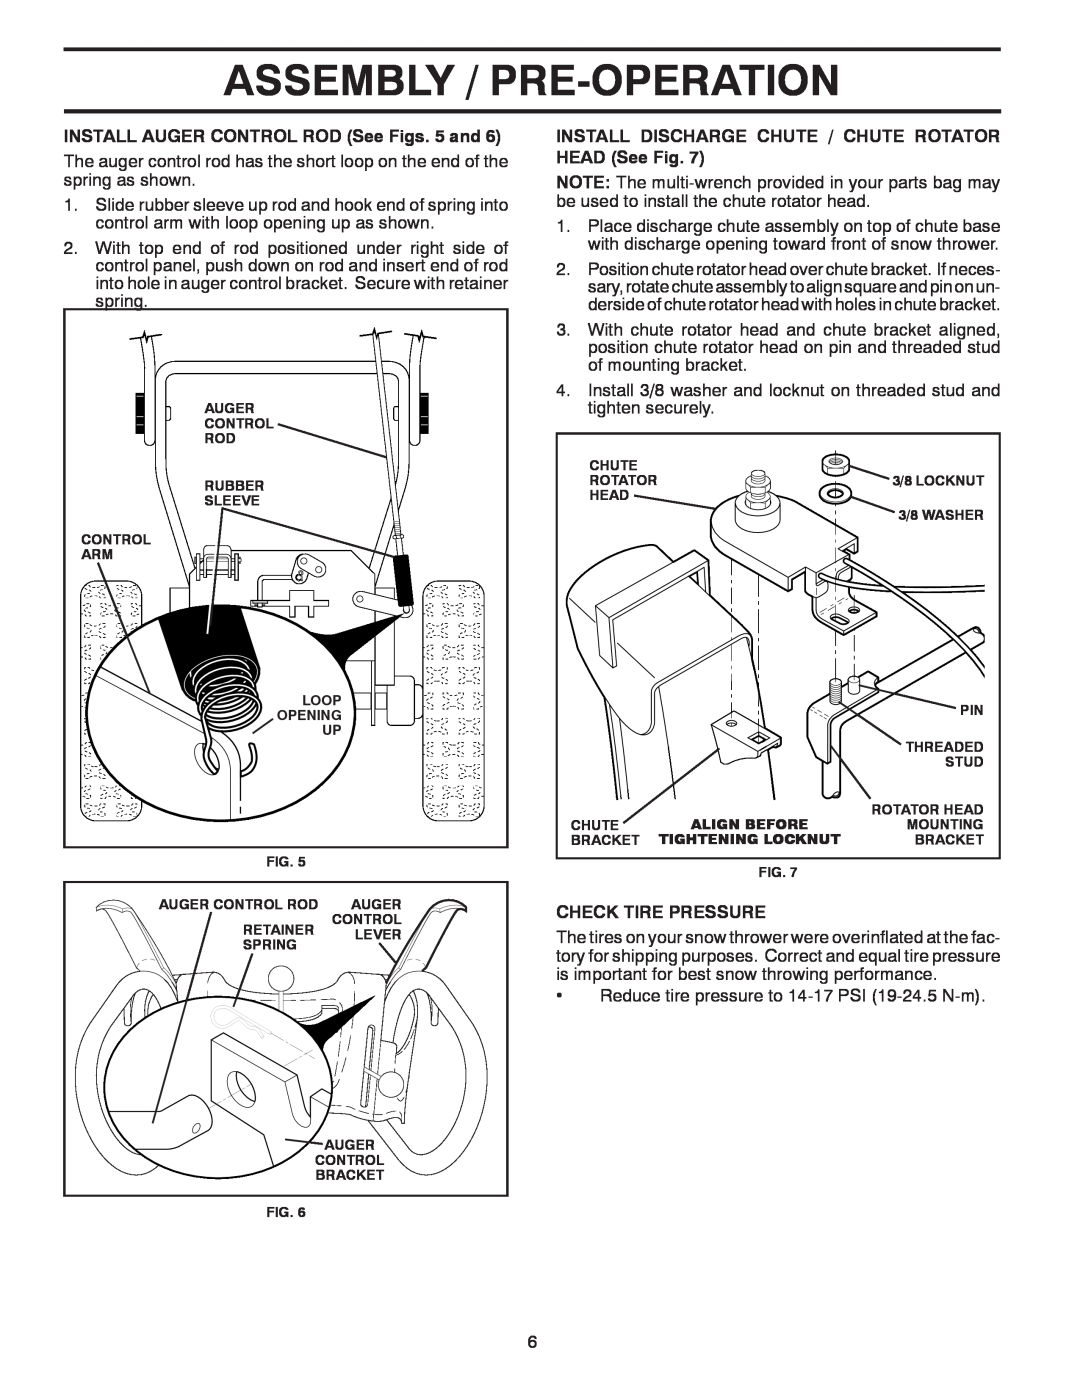 Poulan 96192001802, 416833 Assembly / Pre-Operation, INSTALL AUGER CONTROL ROD See Figs. 5 and, Check Tire Pressure 